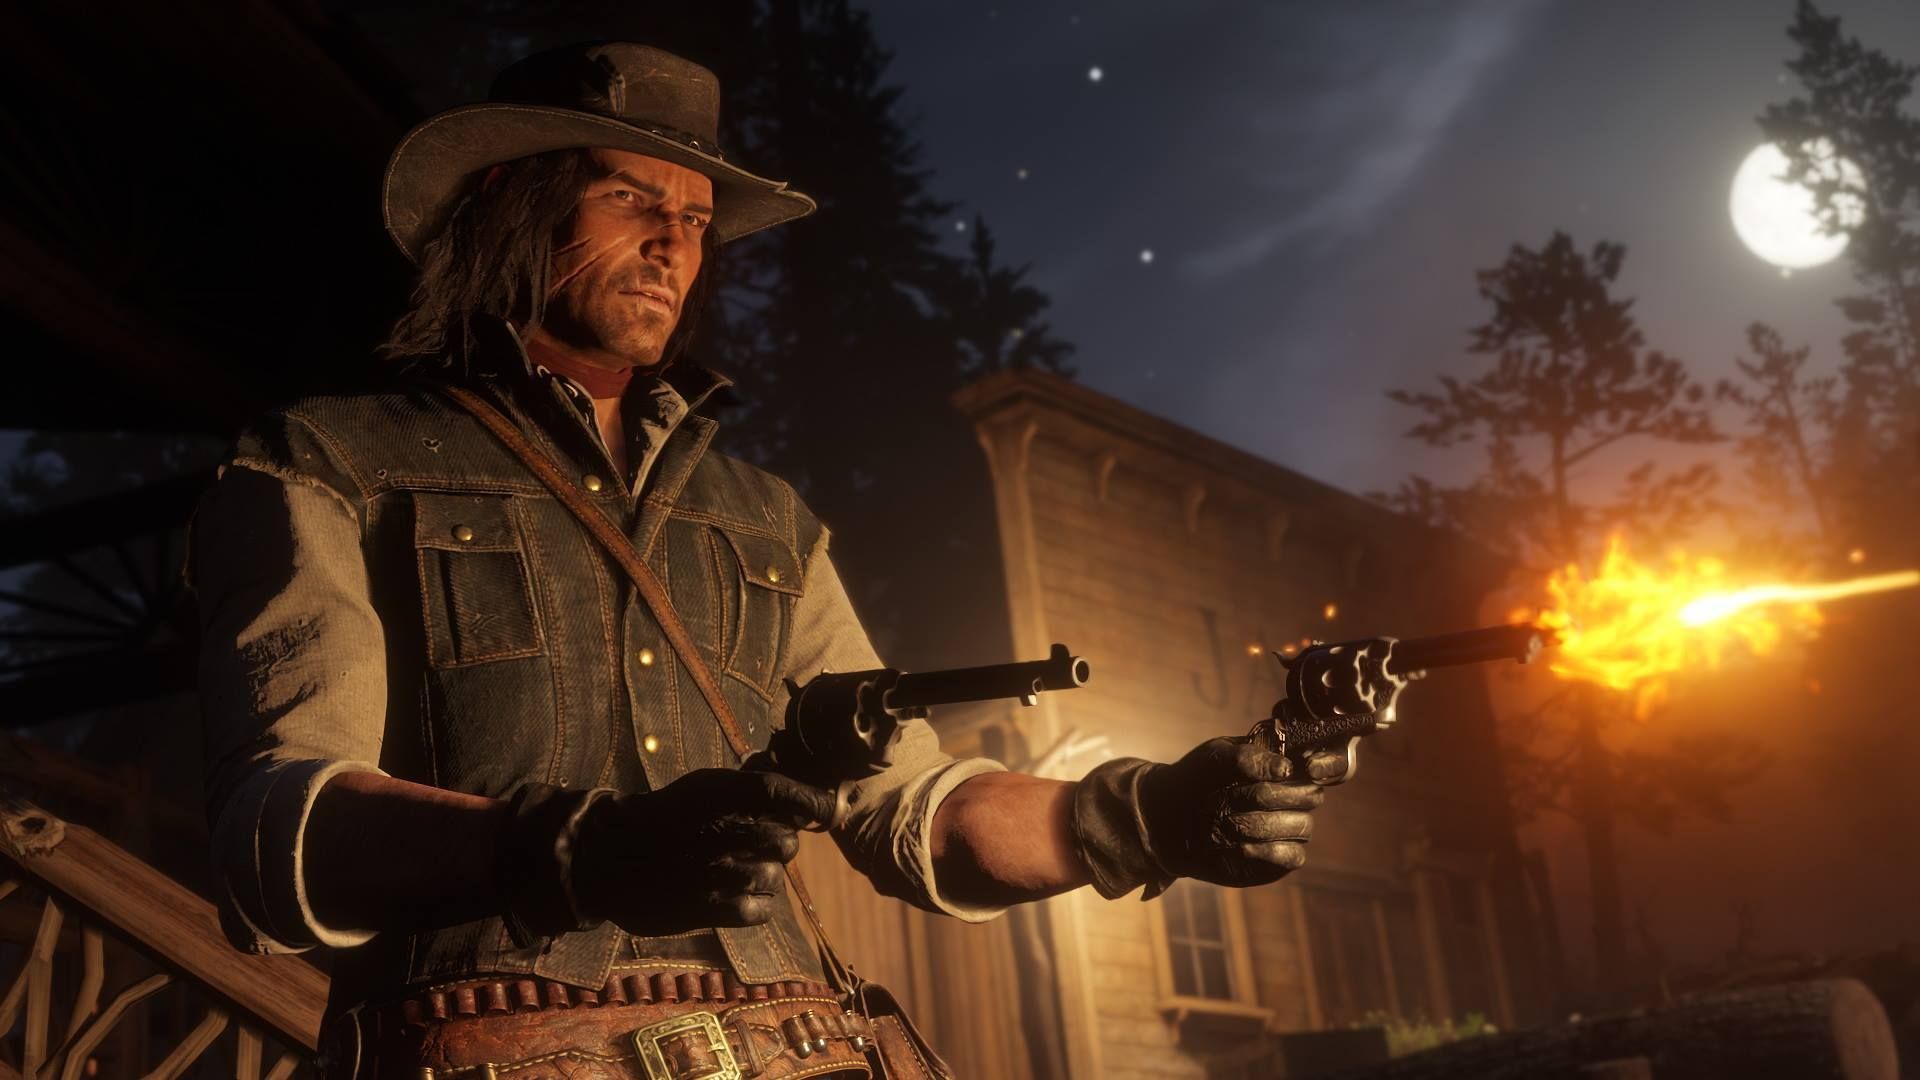 John Marstons 10 Best Quotes In Red Dead Redemption 2